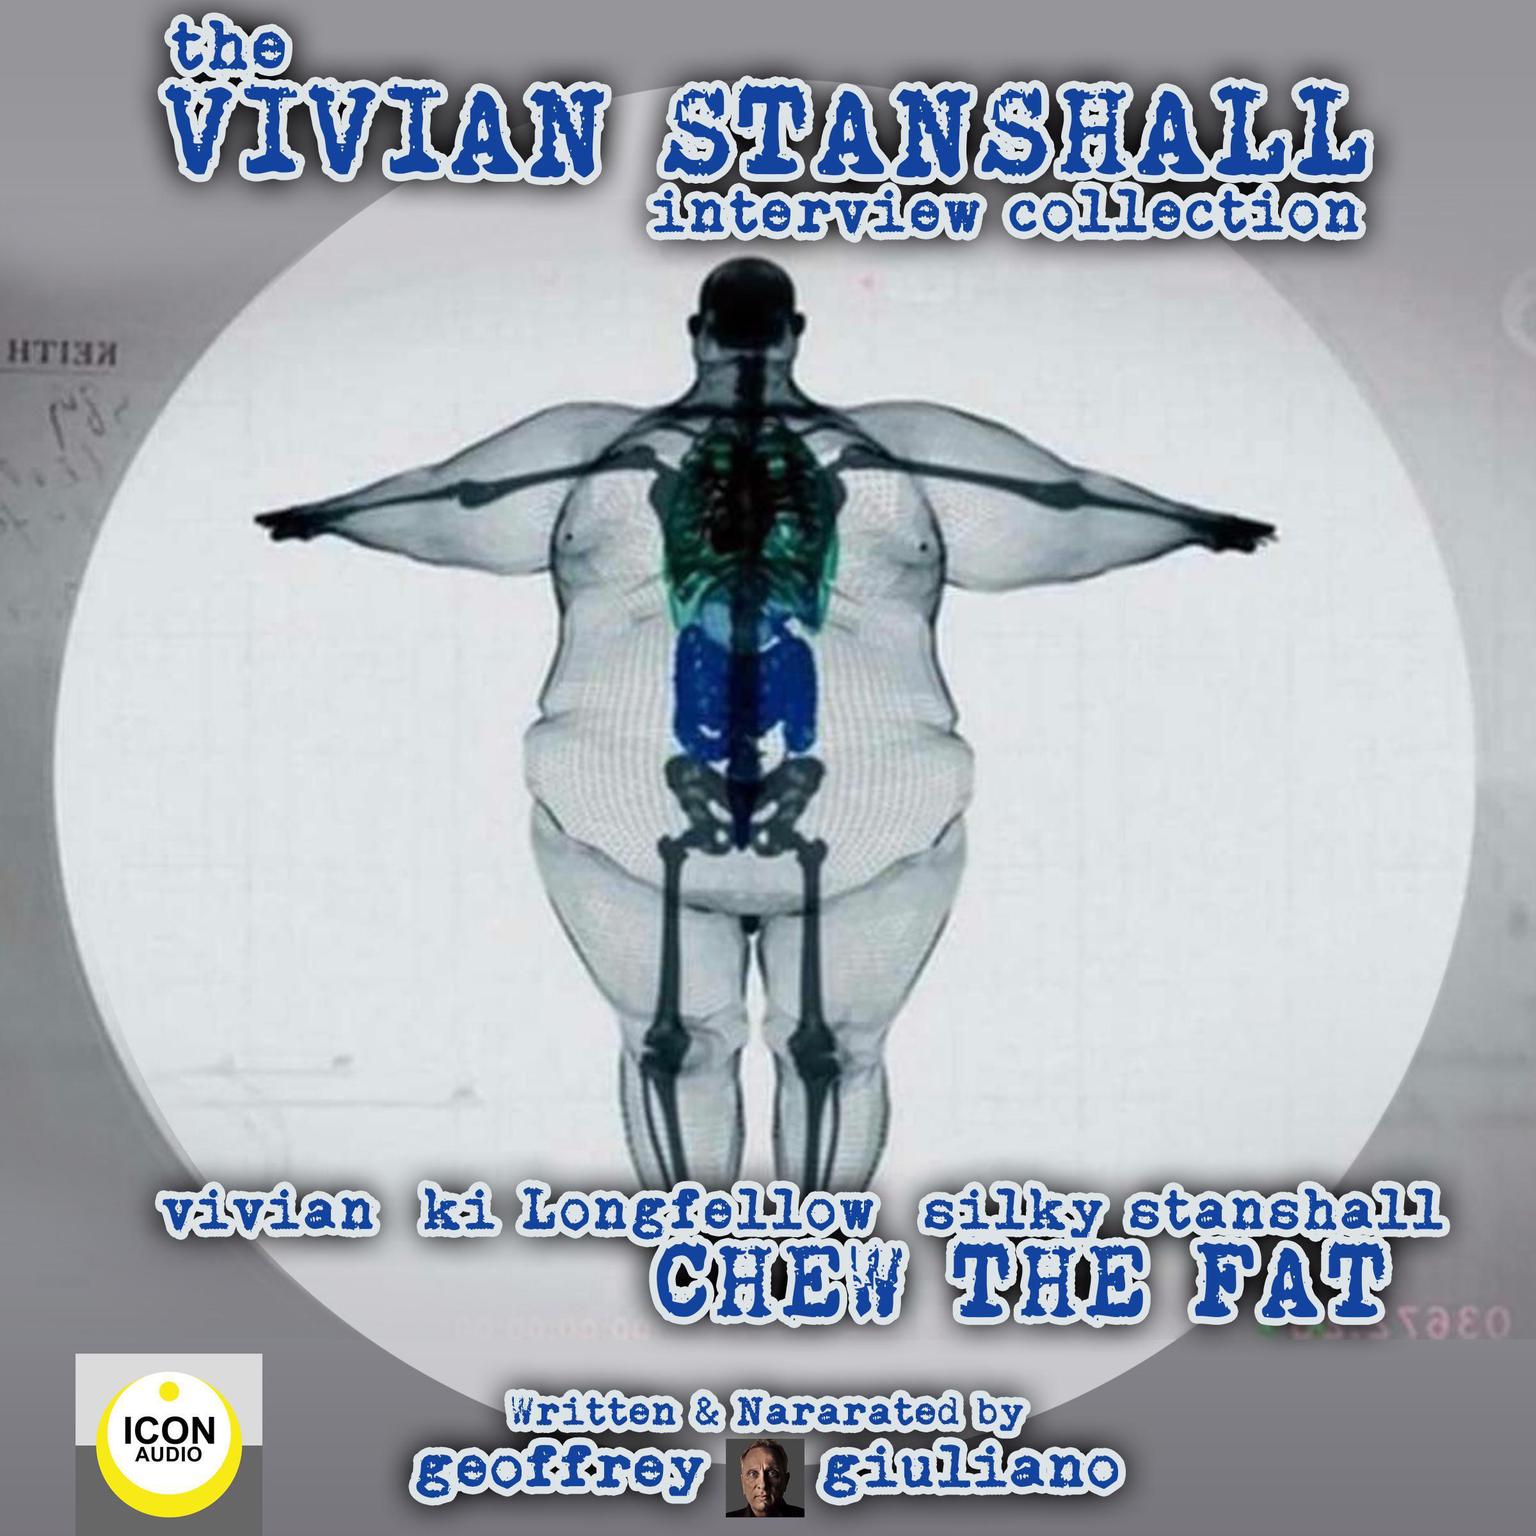 The Vivian Stanshall Interview Collection Audiobook, by Geoffrey Giuliano